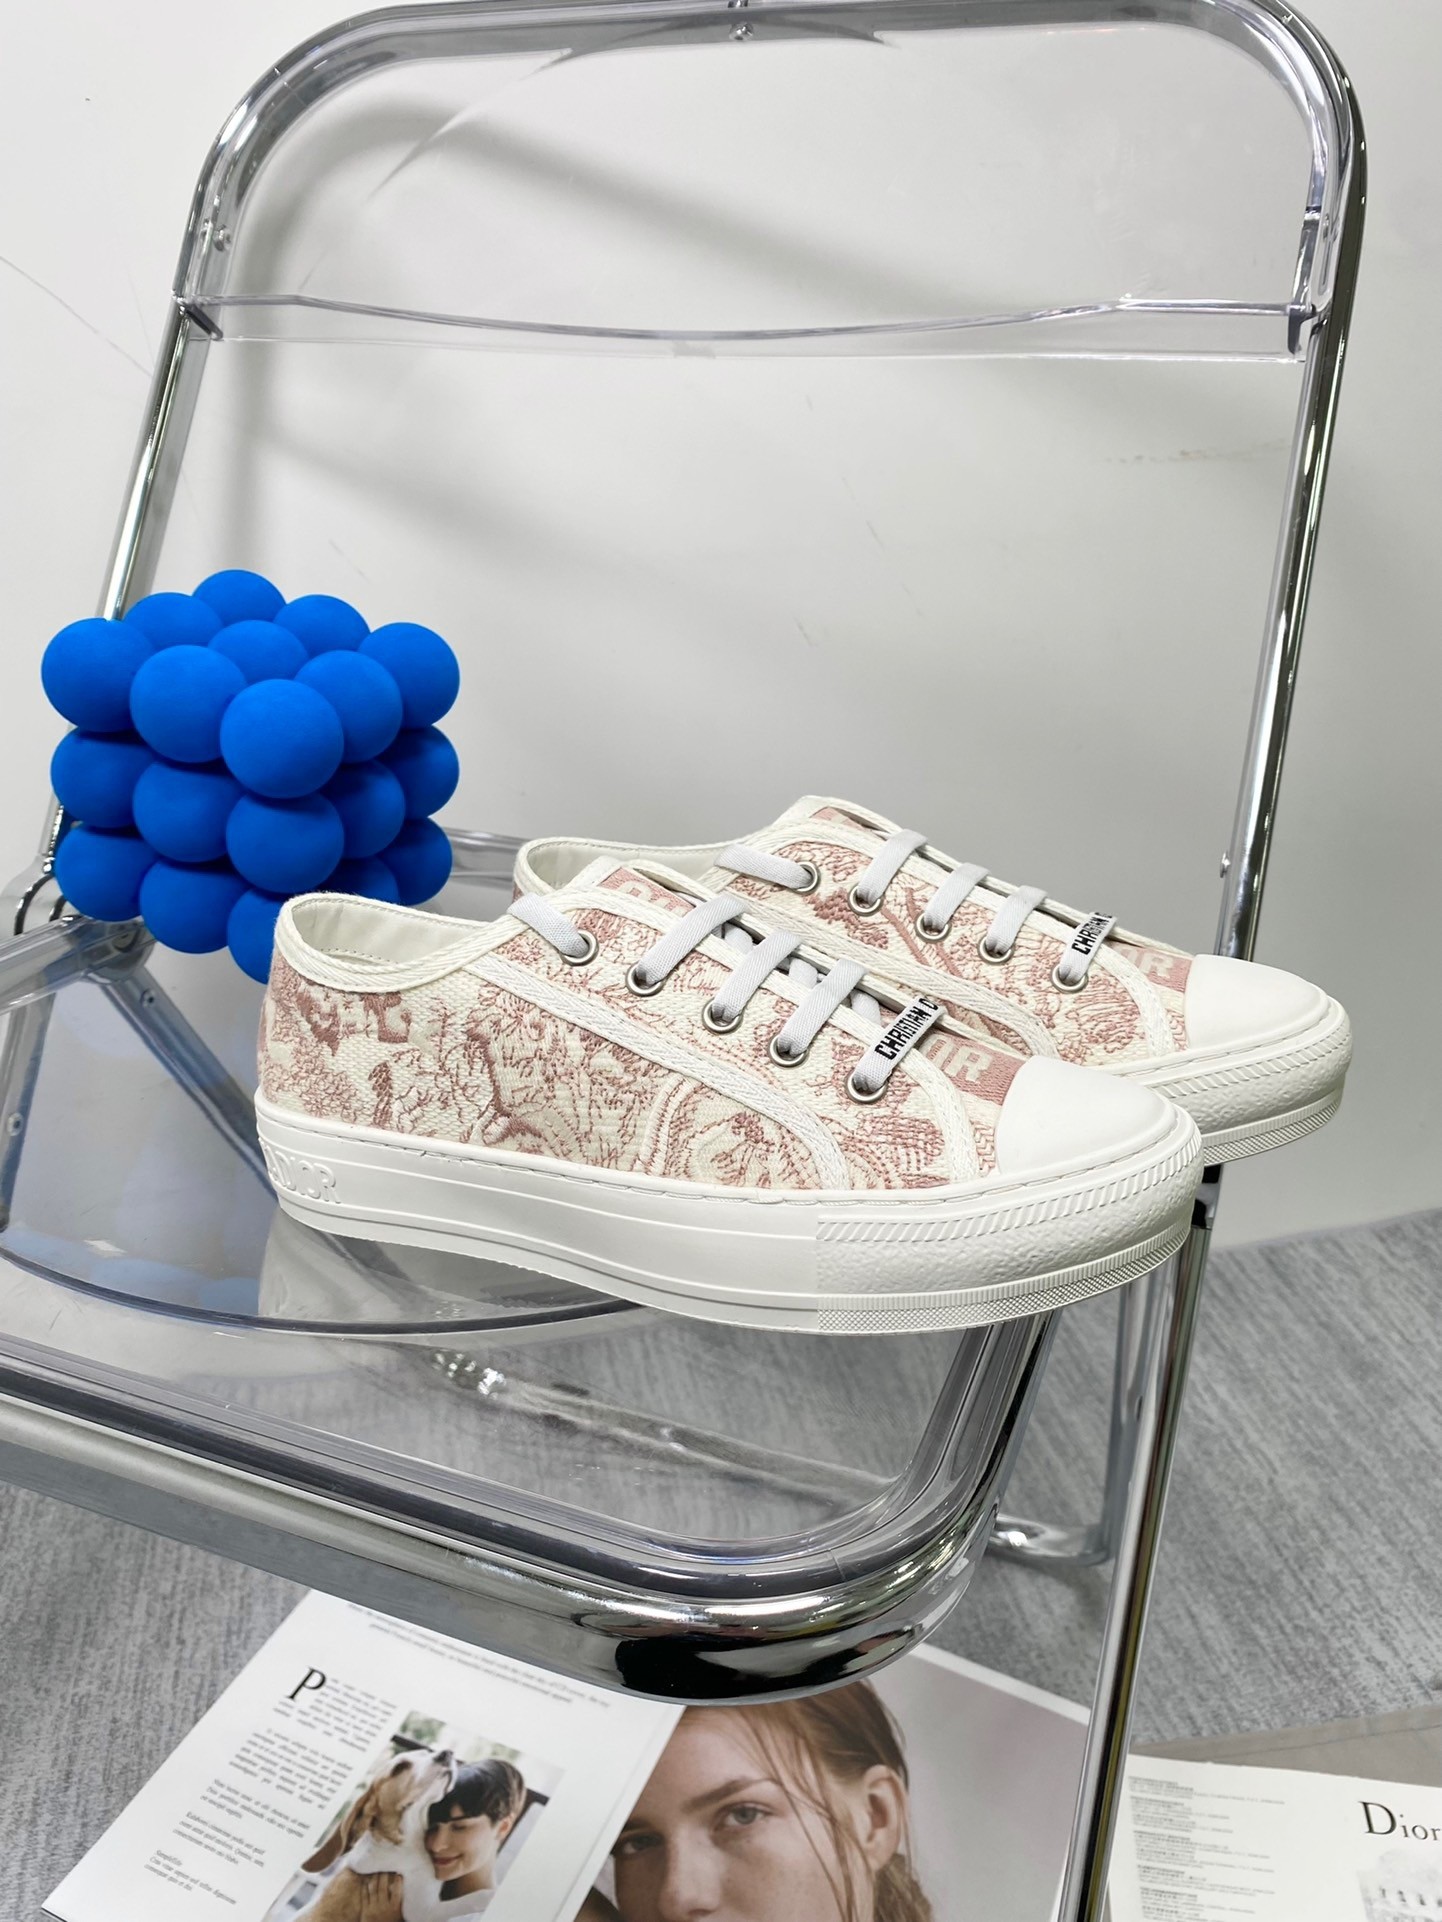 Dior Skateboard Shoes Sneakers Canvas Shoes Embroidery Canvas Casual